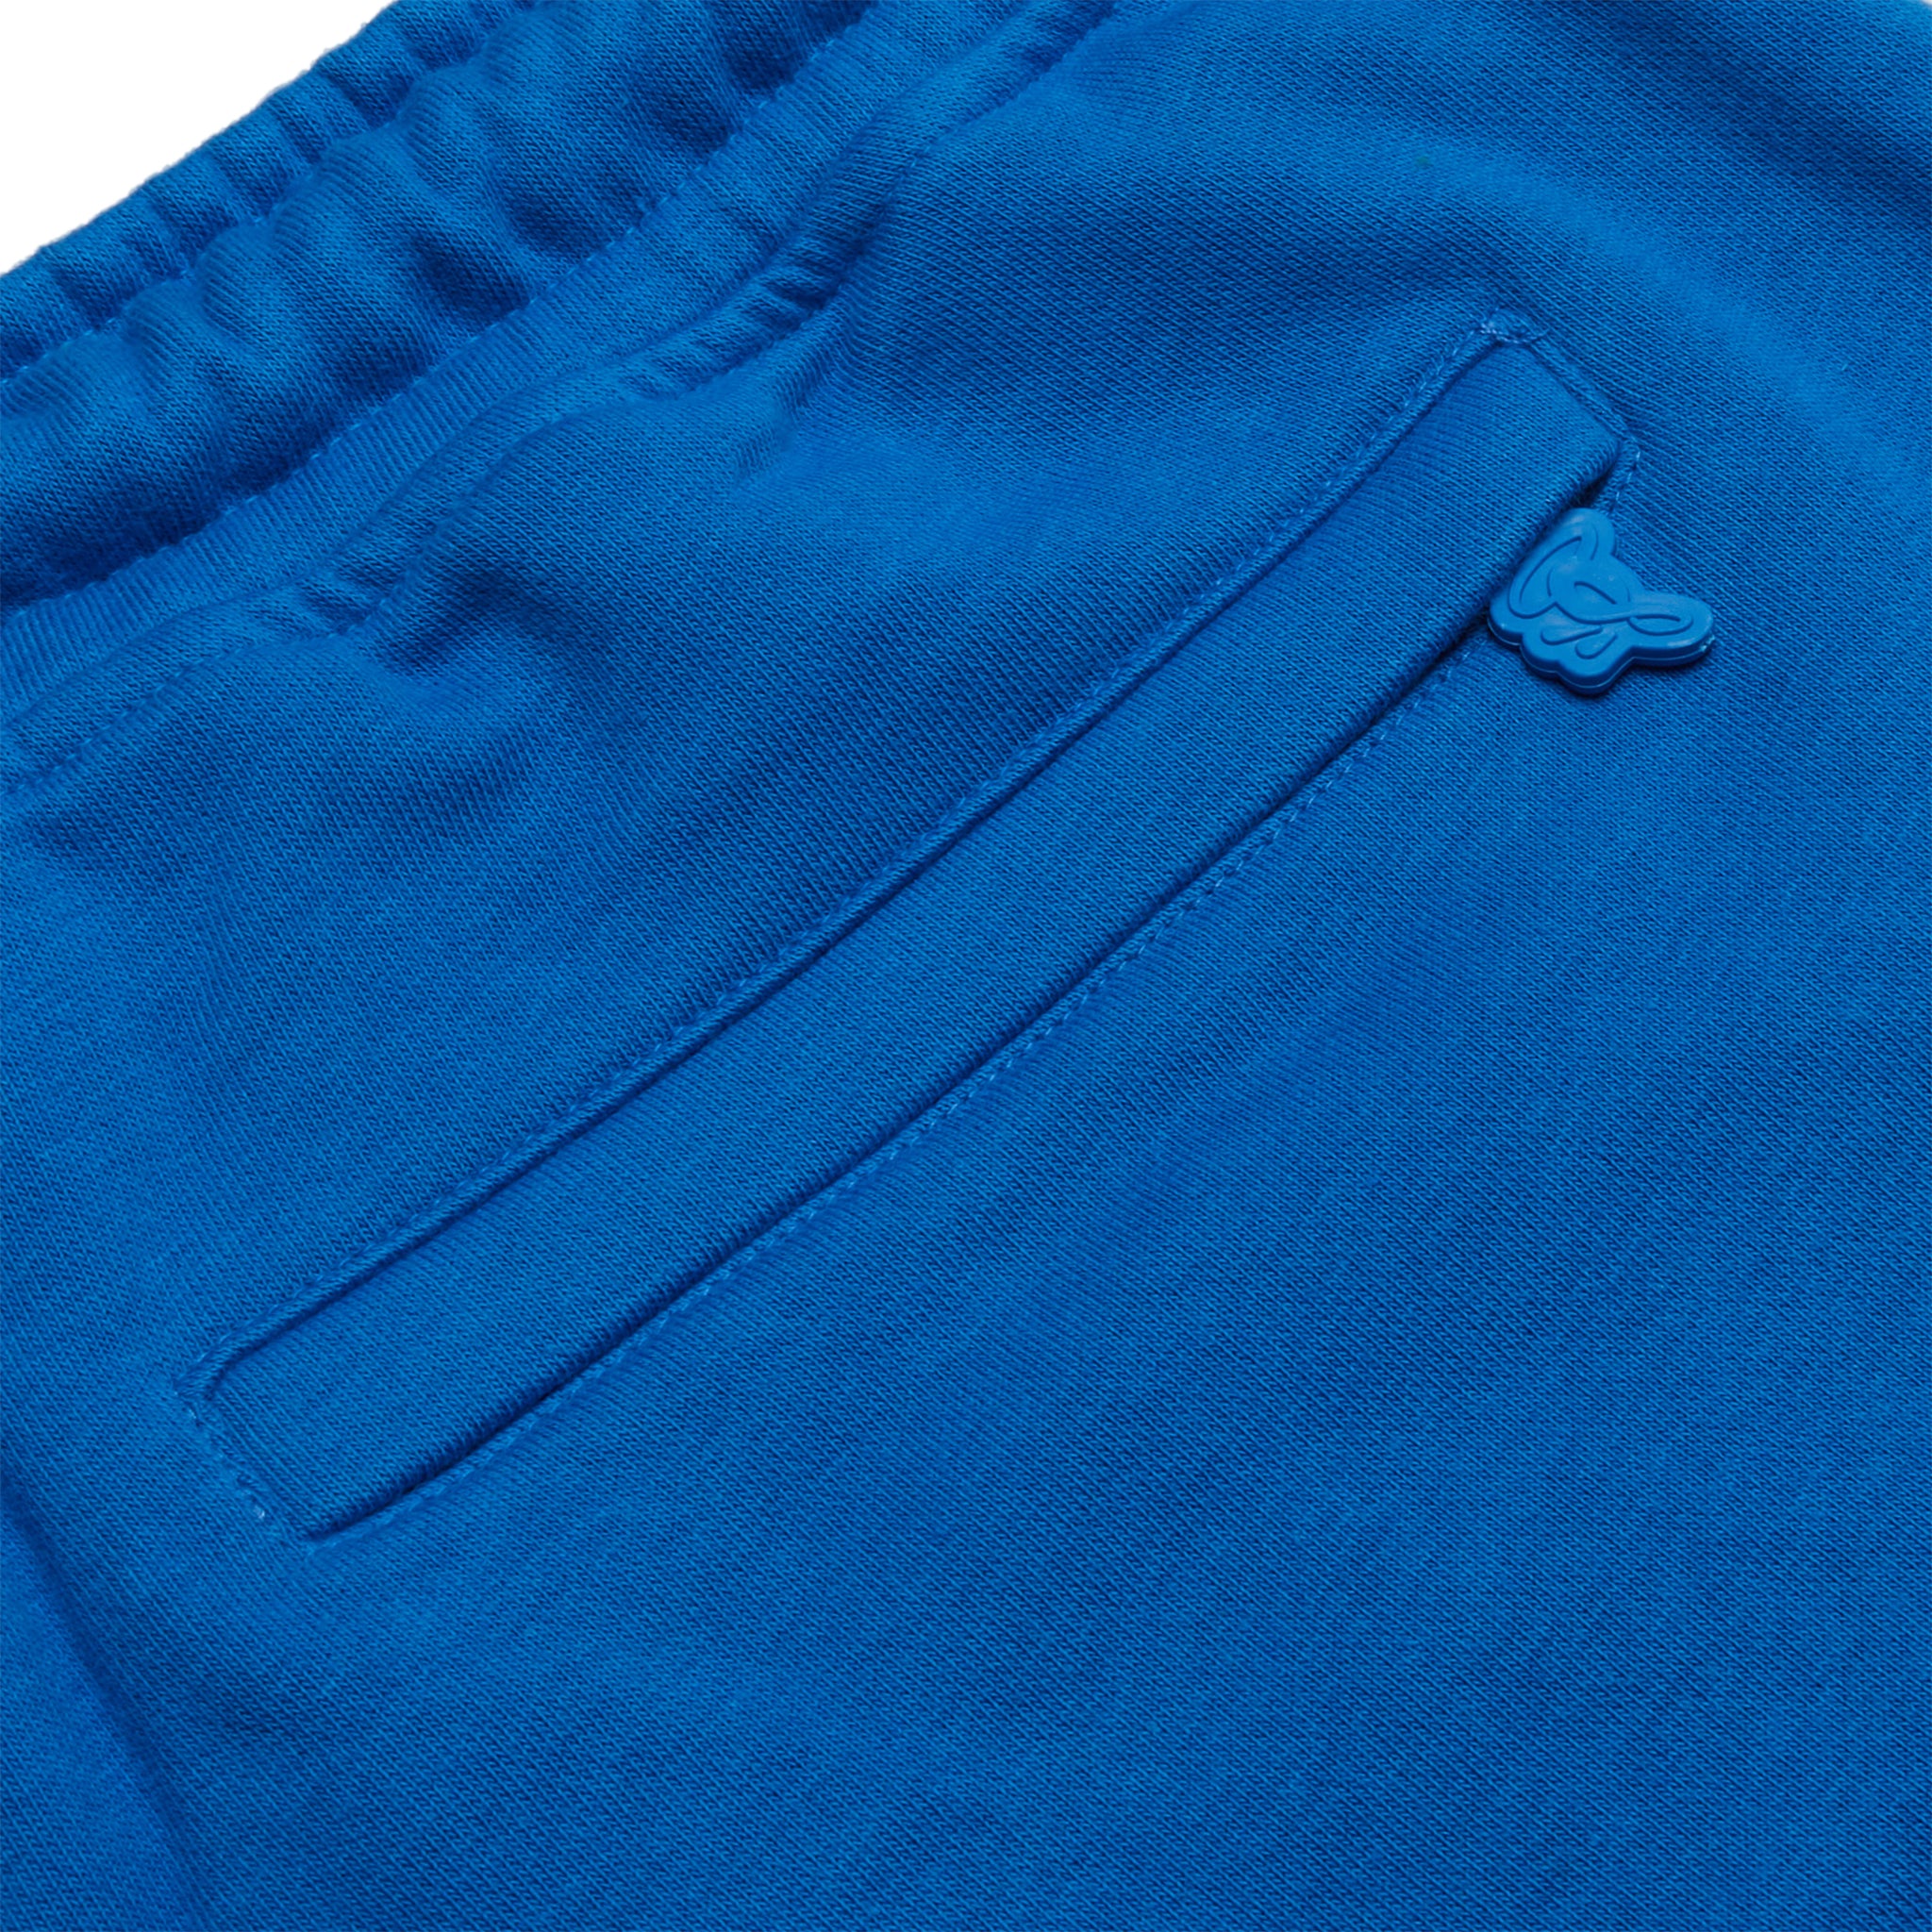 Back pocket view of Syna World Team Syna Twinset Cobalt T-Shirt & Shorts